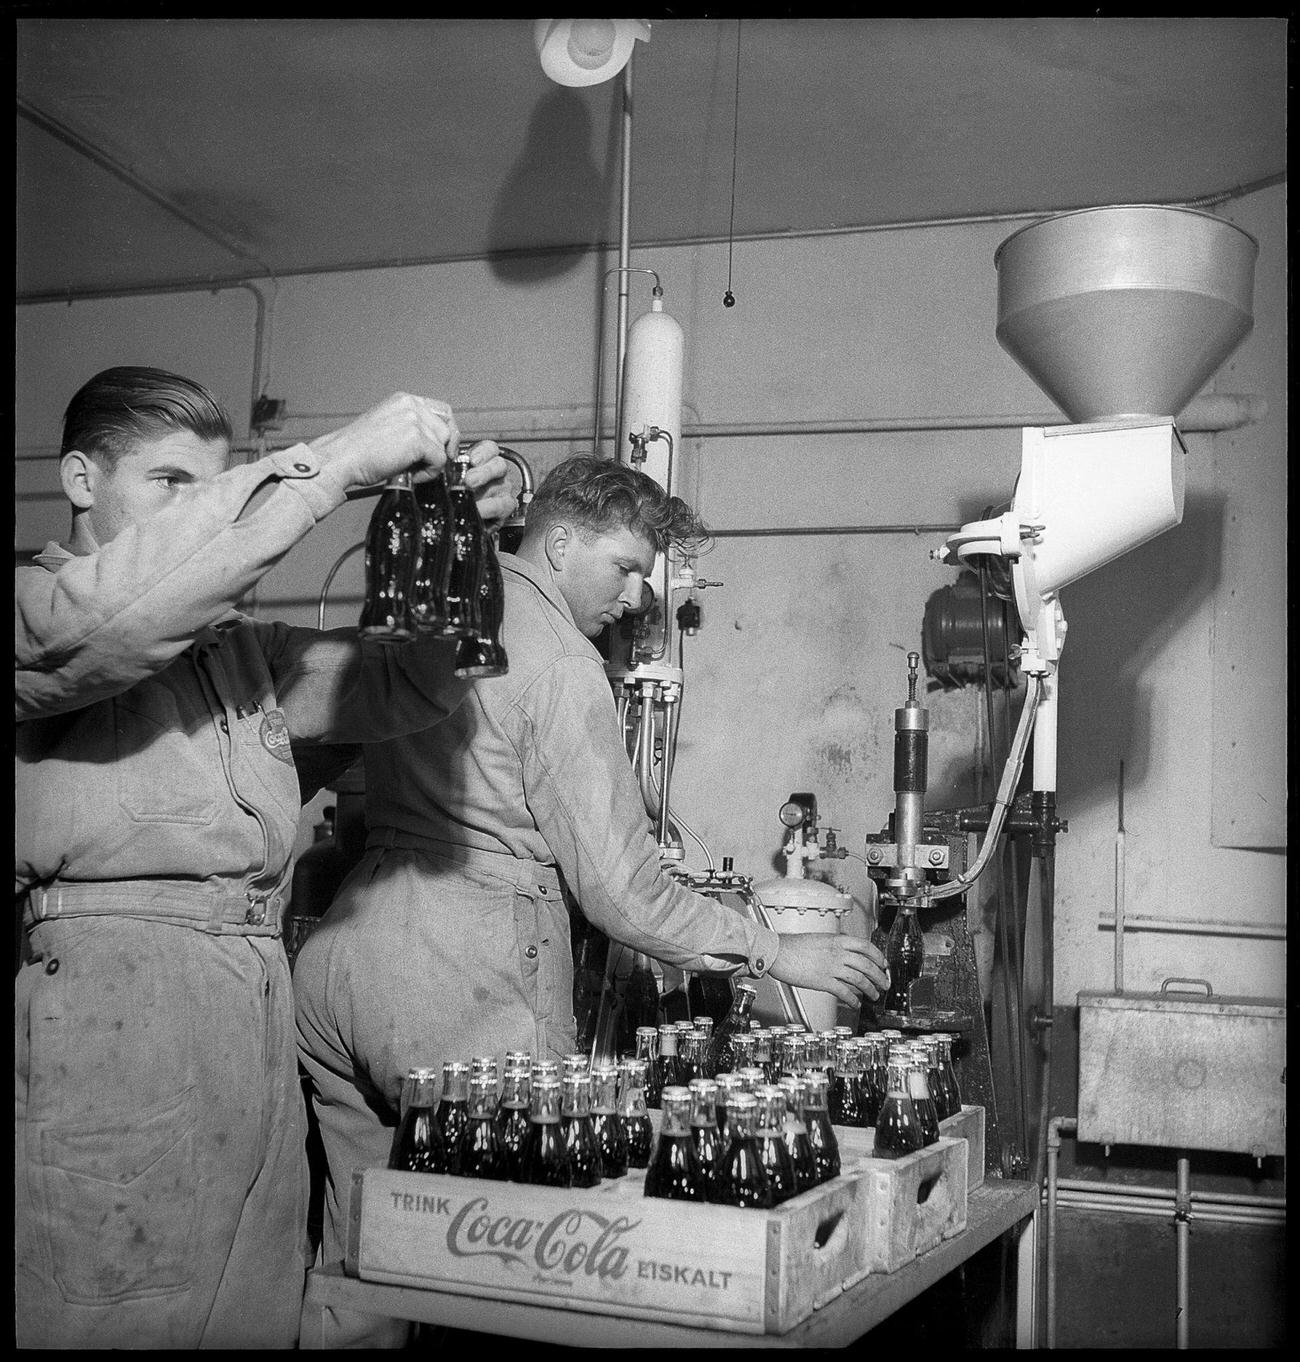 Coca-Cola worker at a bottling plant in Bern with a bottle, 1949.